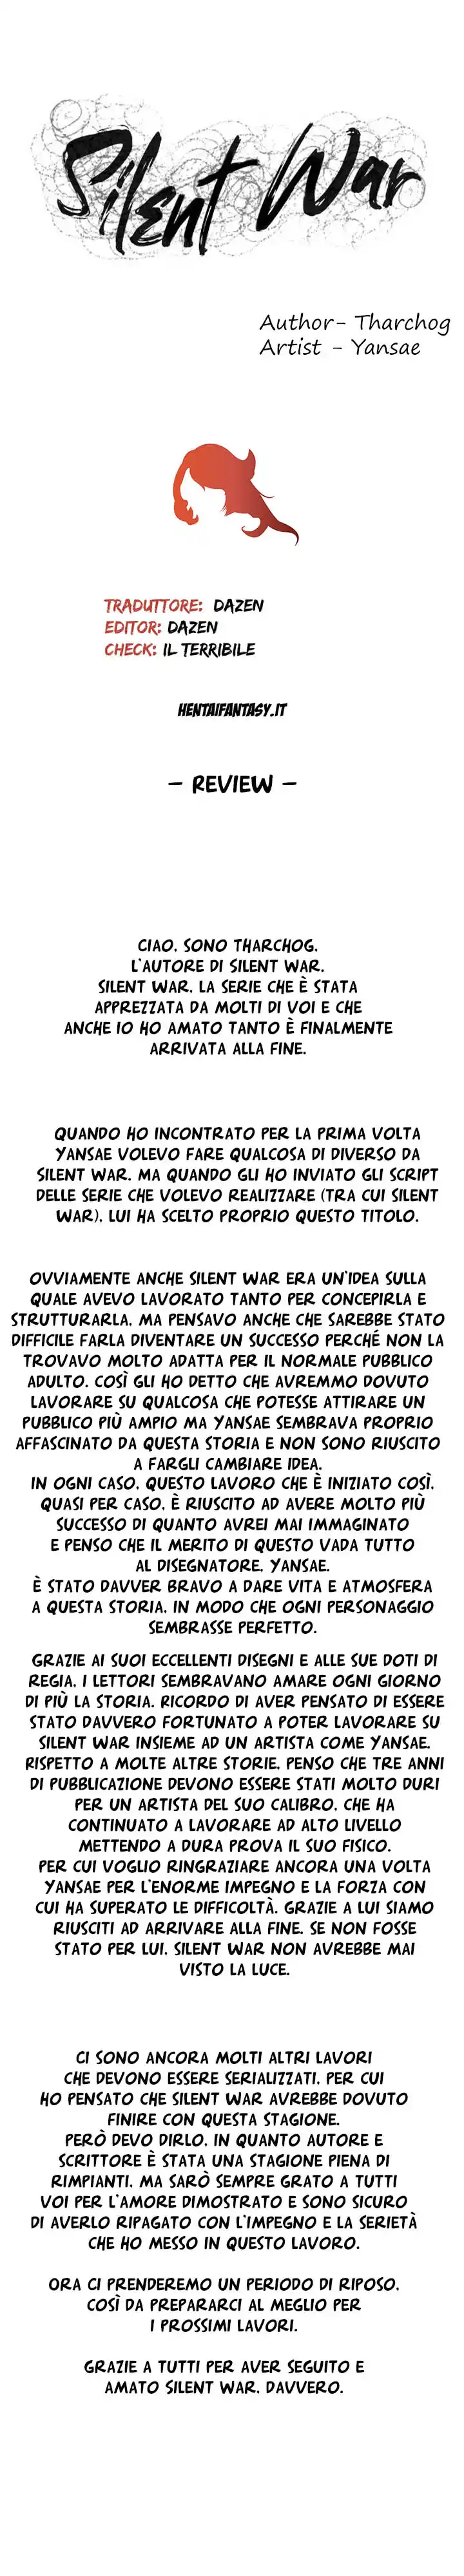 Silent War Capitolo 160.5 page 1